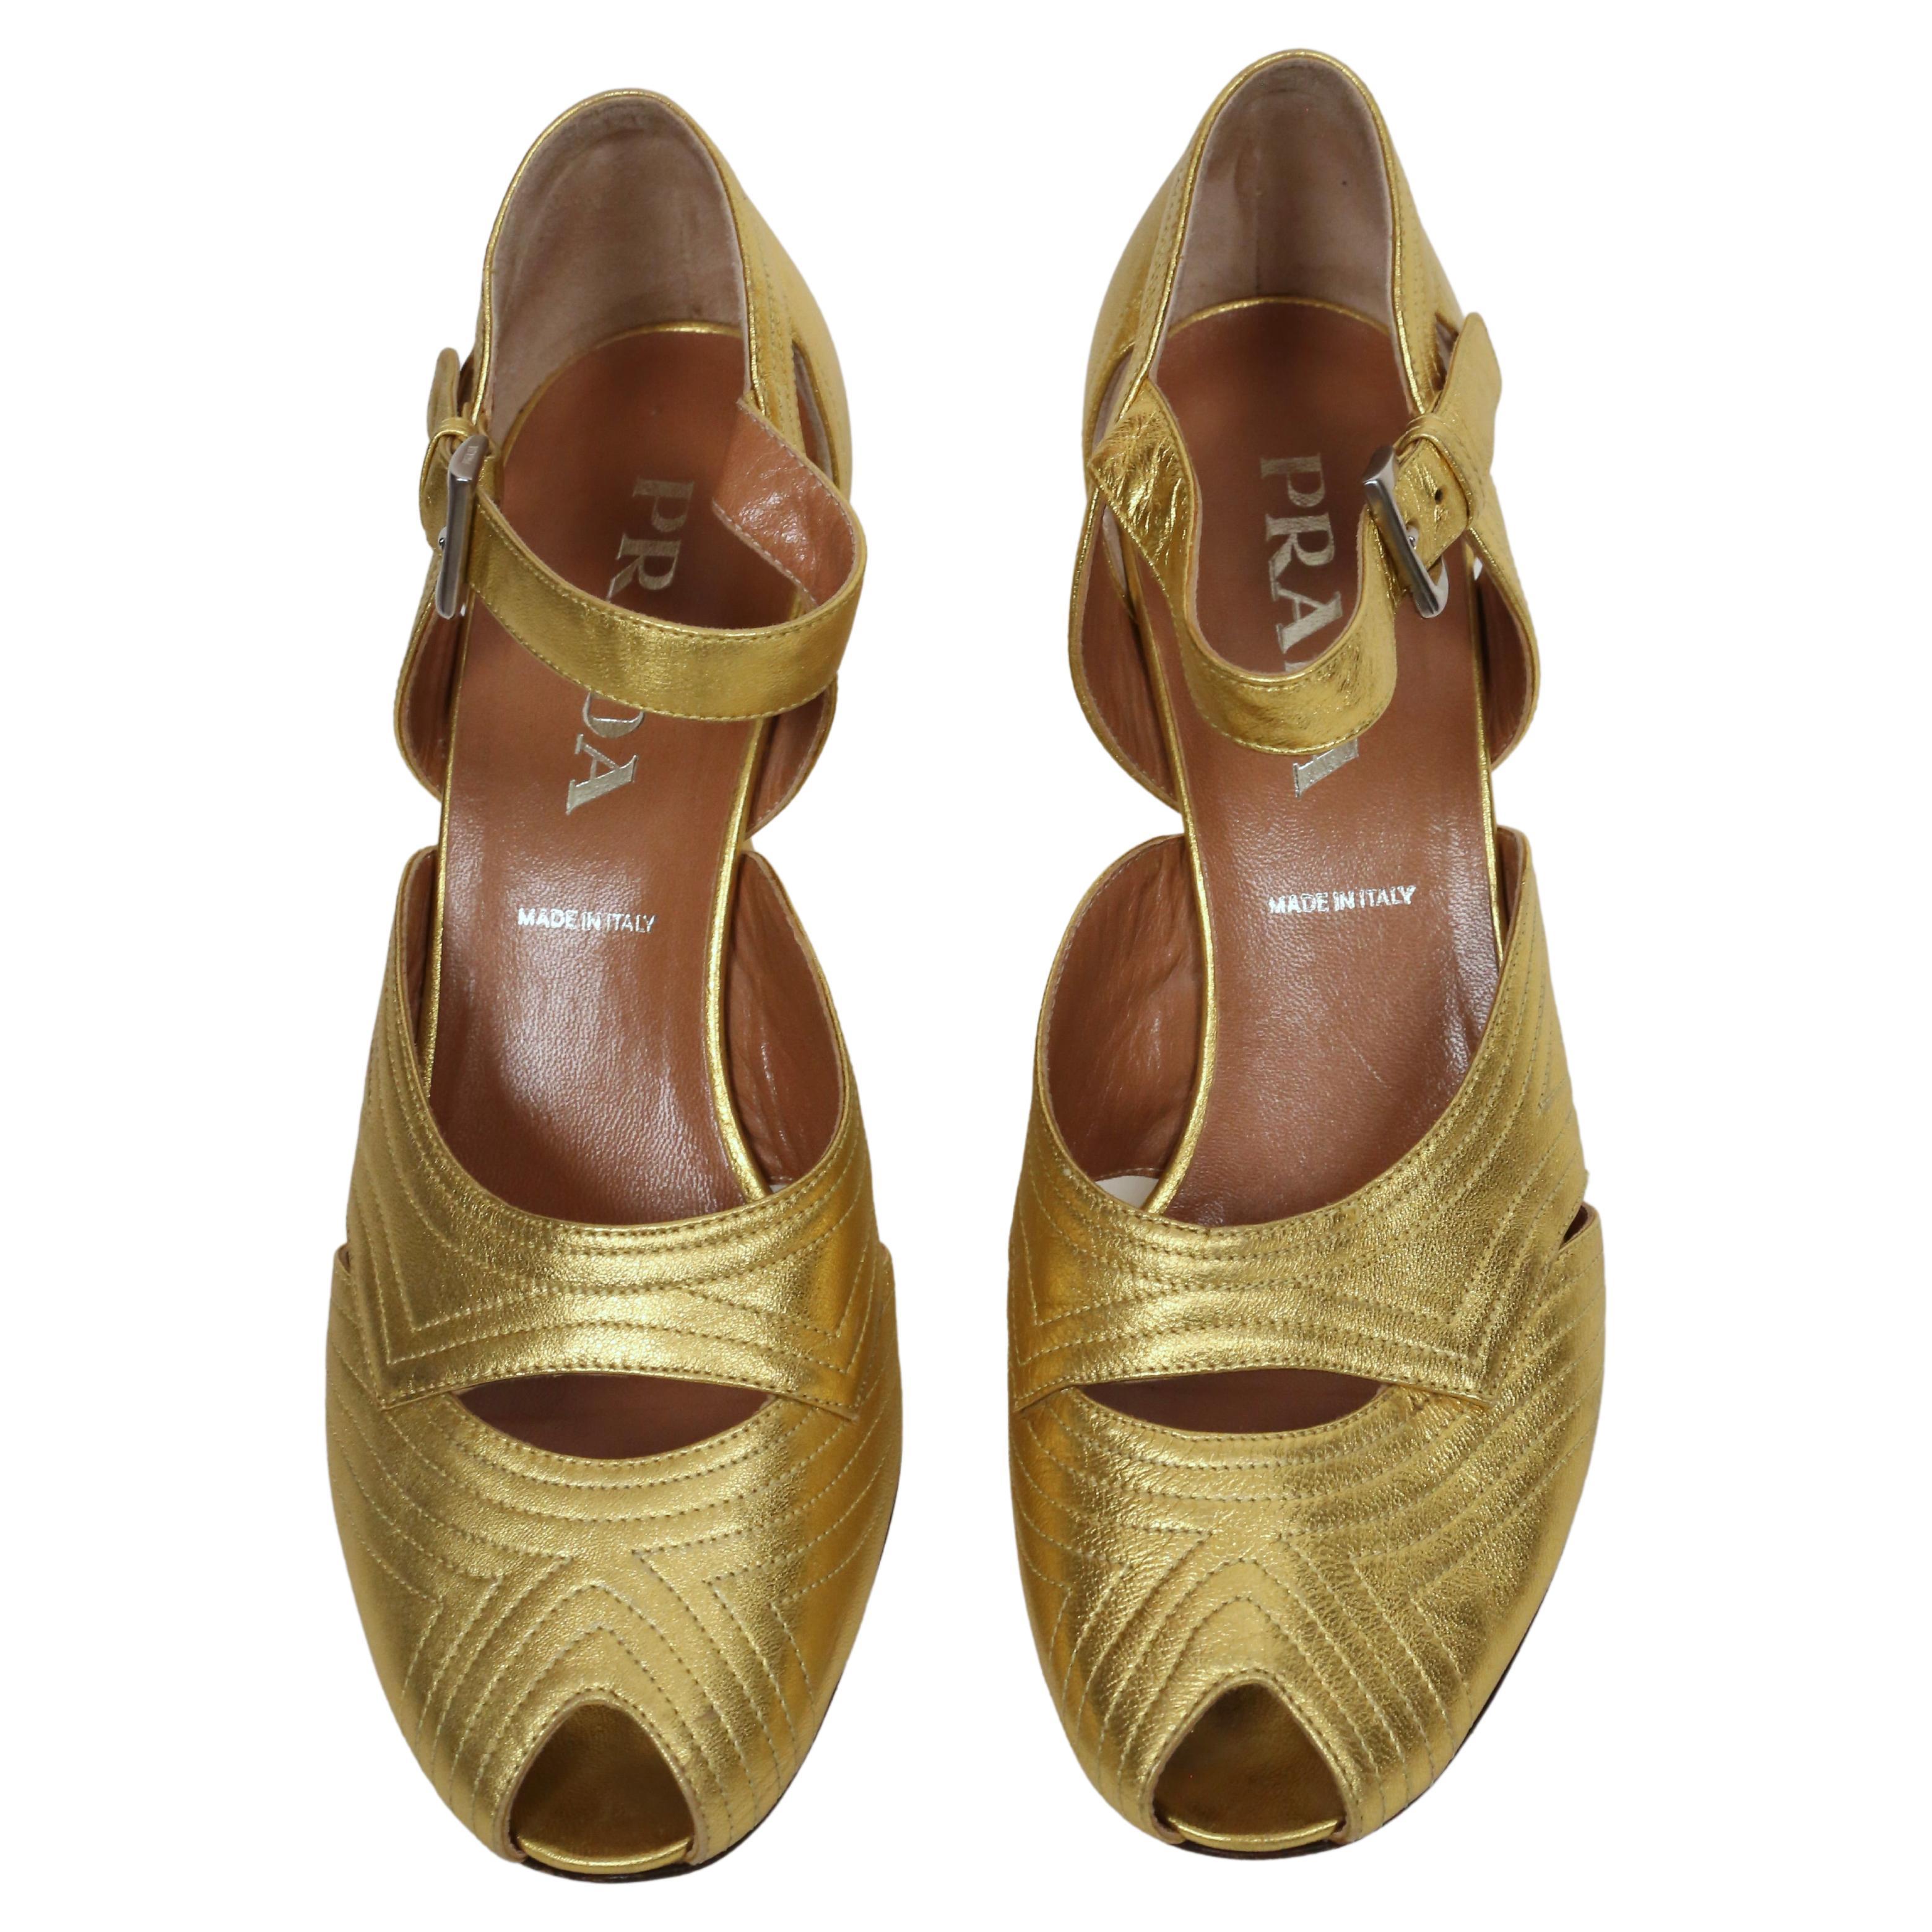 Women's vintage PRADA gold leather heels with decorative topstitching and peep toes - 40 For Sale